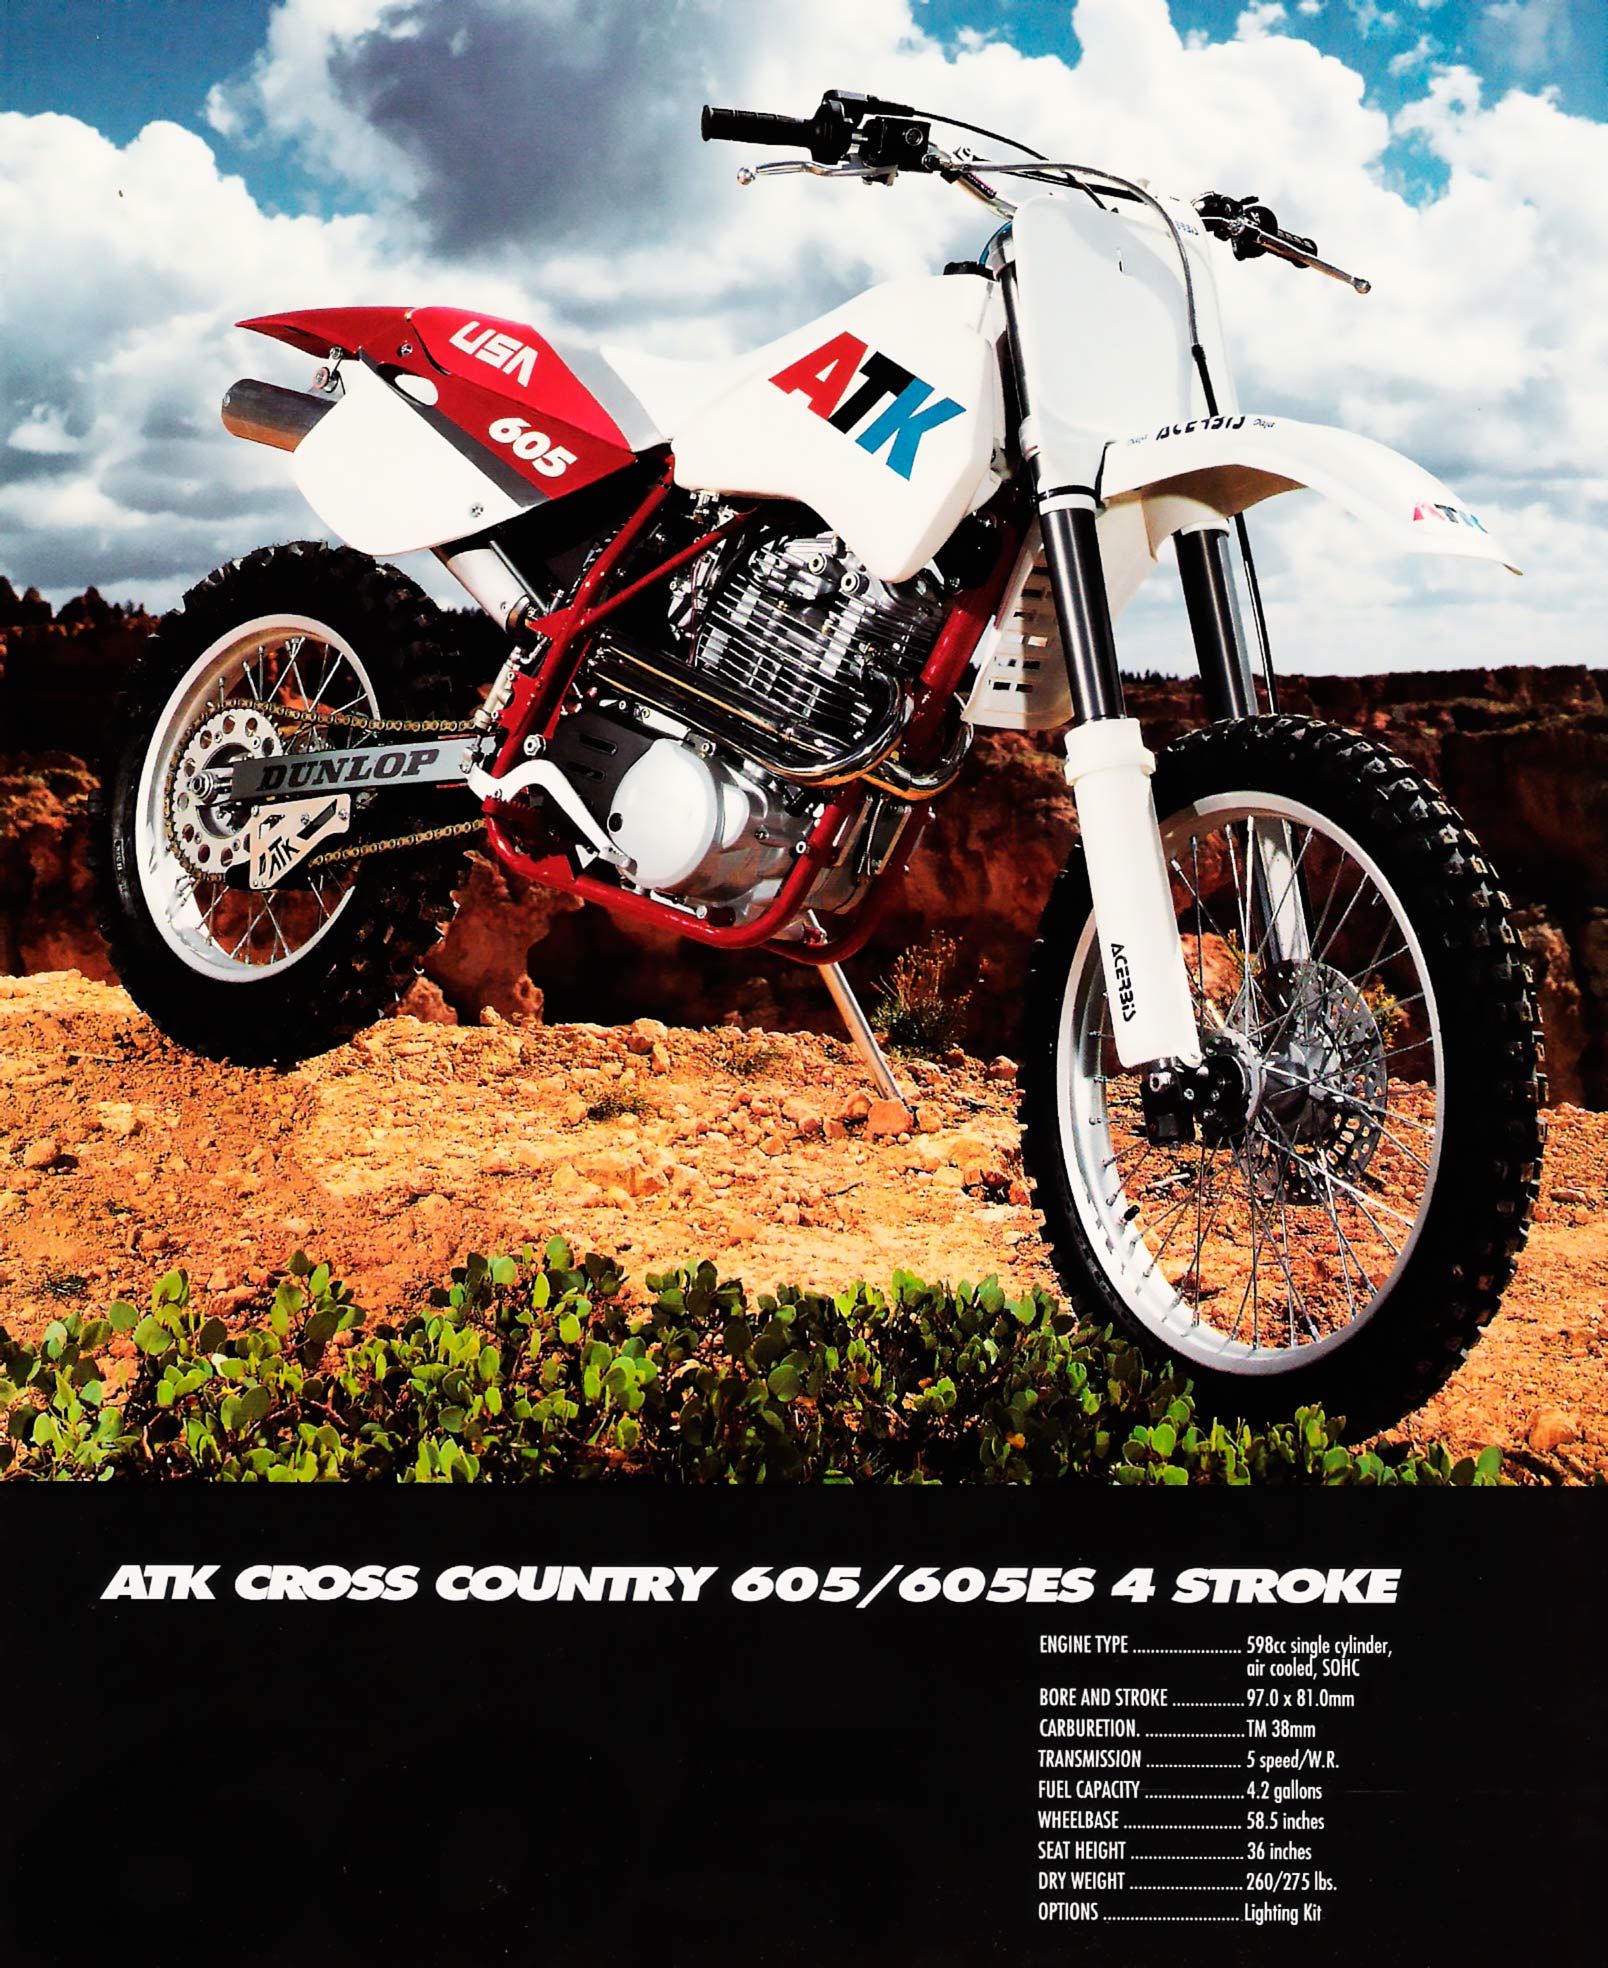 ATK CROSS COUNTRY 605 1994 запчасти